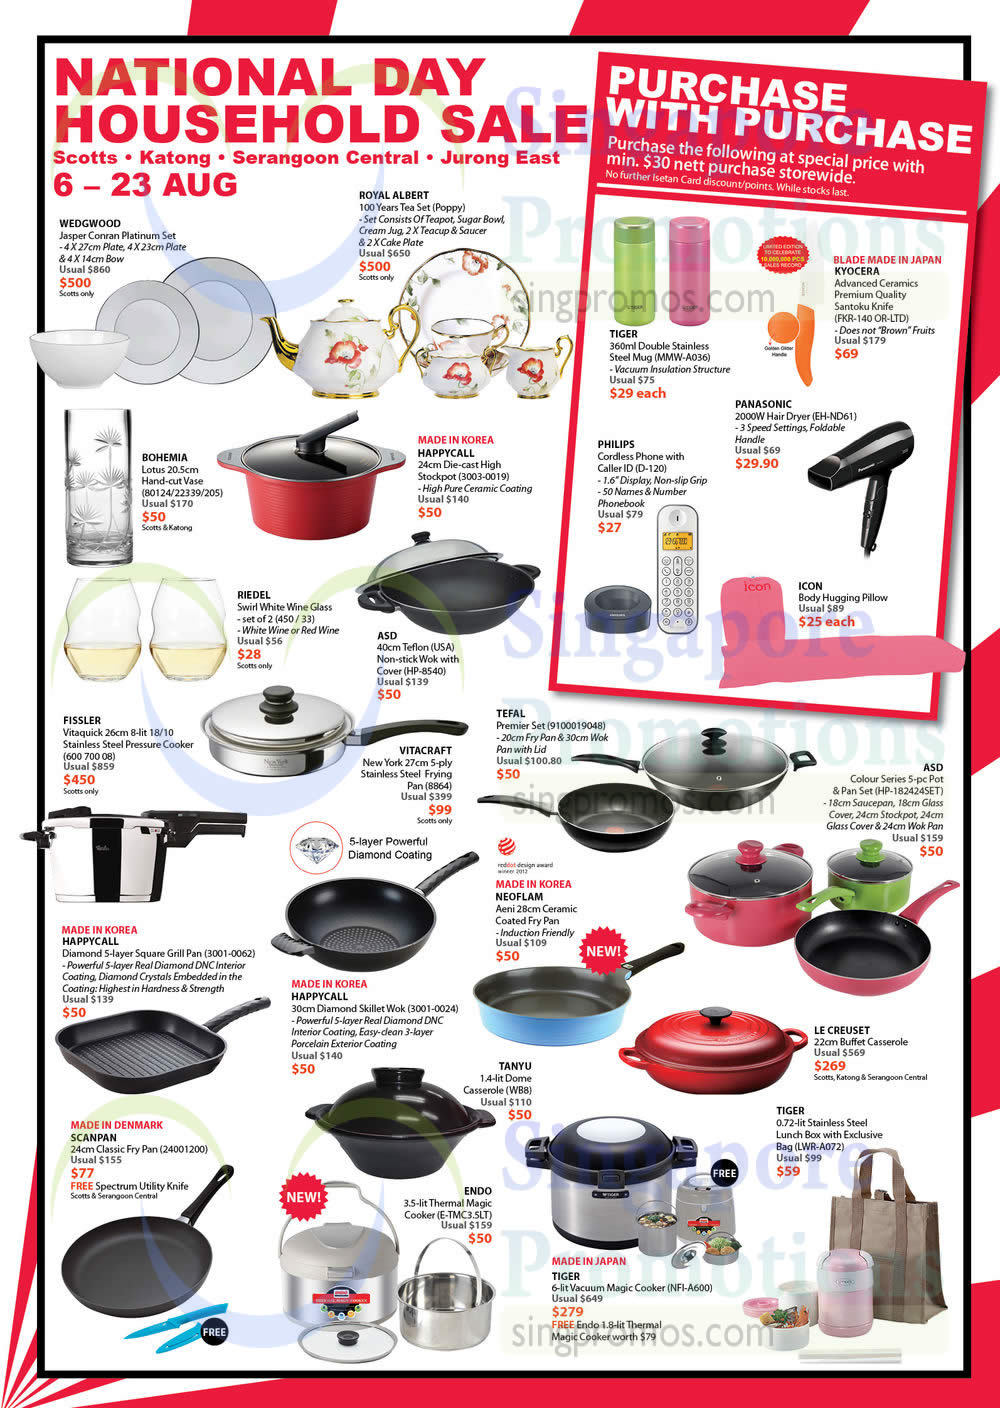 Featured image for Isetan National Day Household Sale 6 - 23 Aug 2015